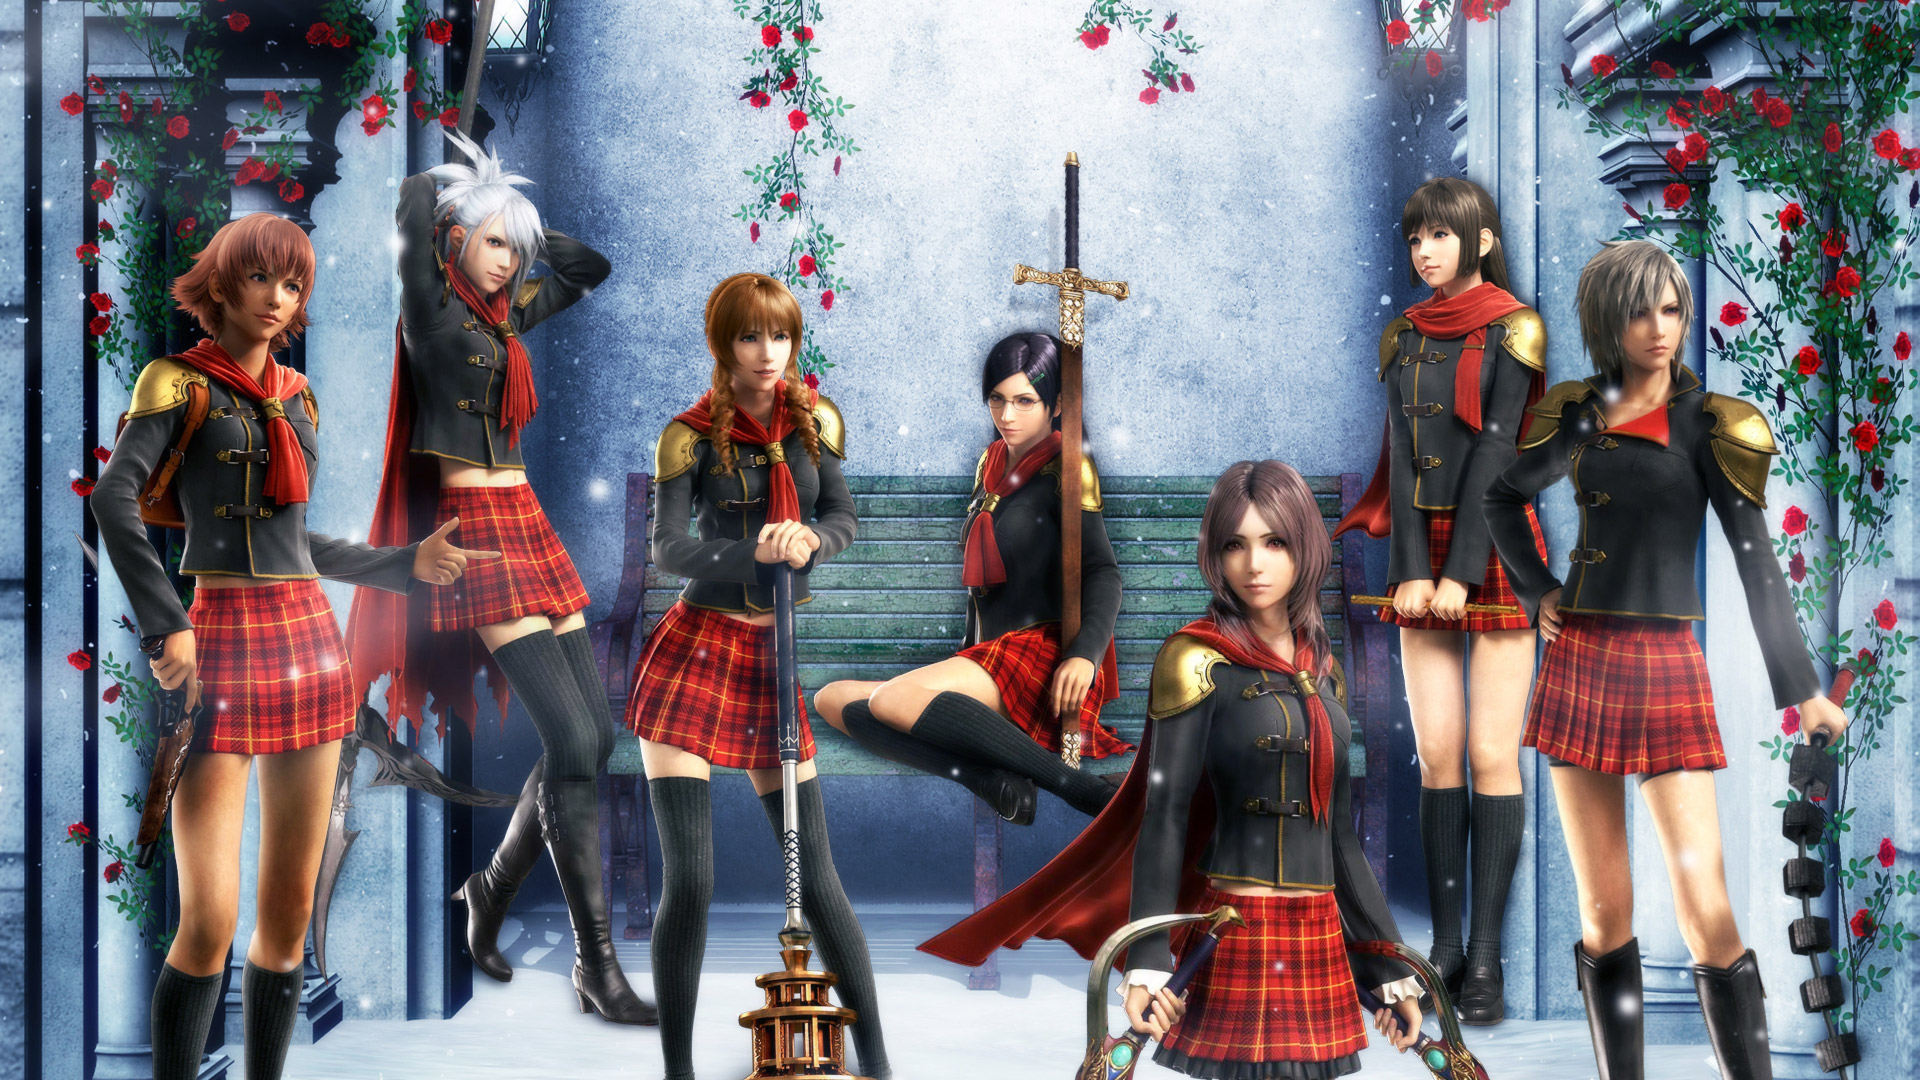 download final fantasy type 0 seven for free